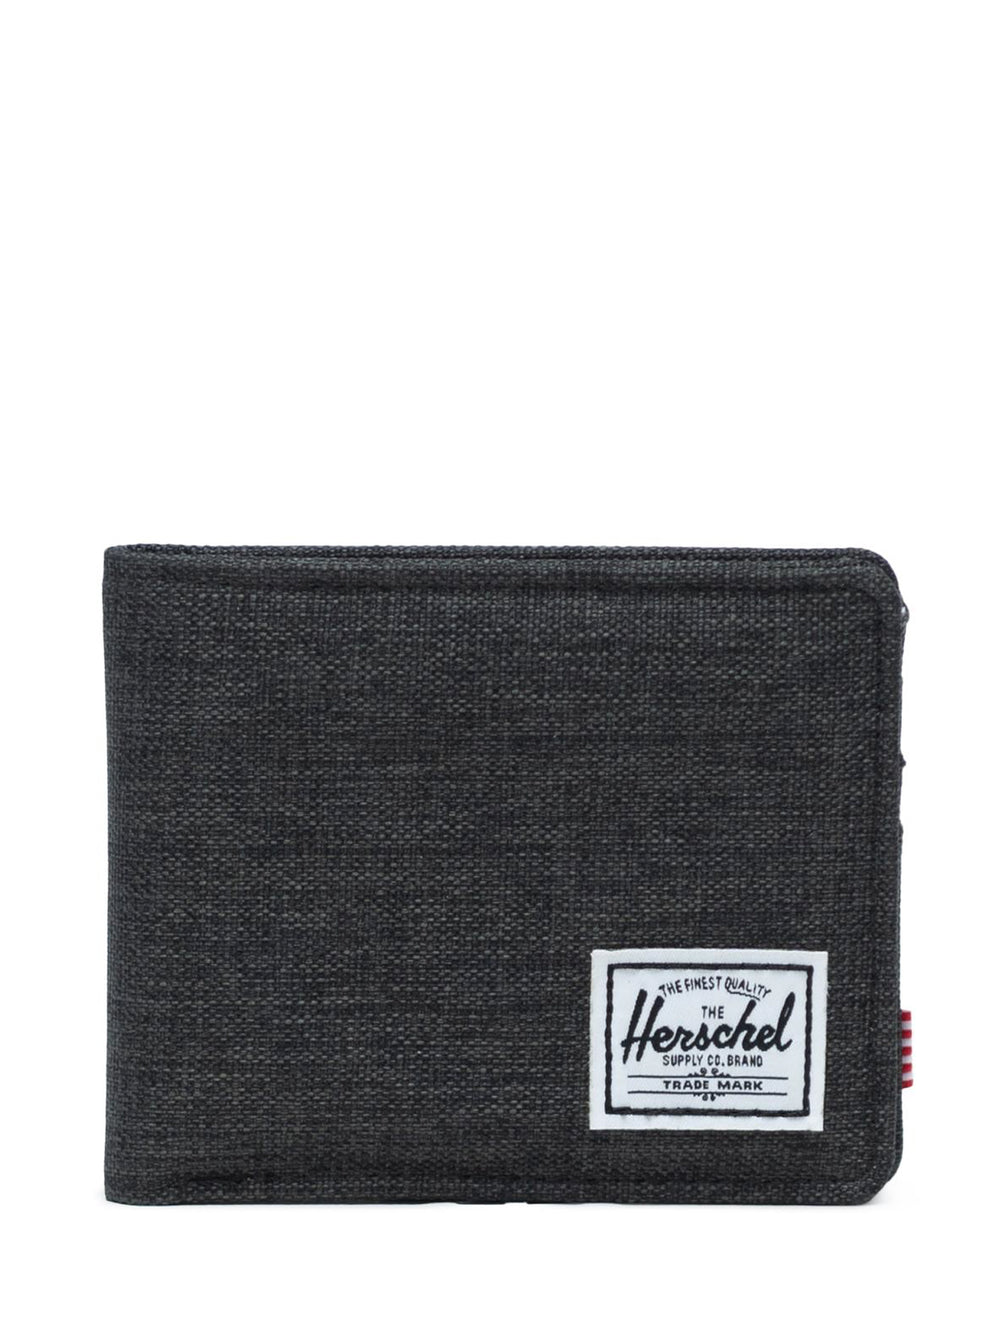 HERSCHEL SUPPLY CO. ROY   - CLEARANCE